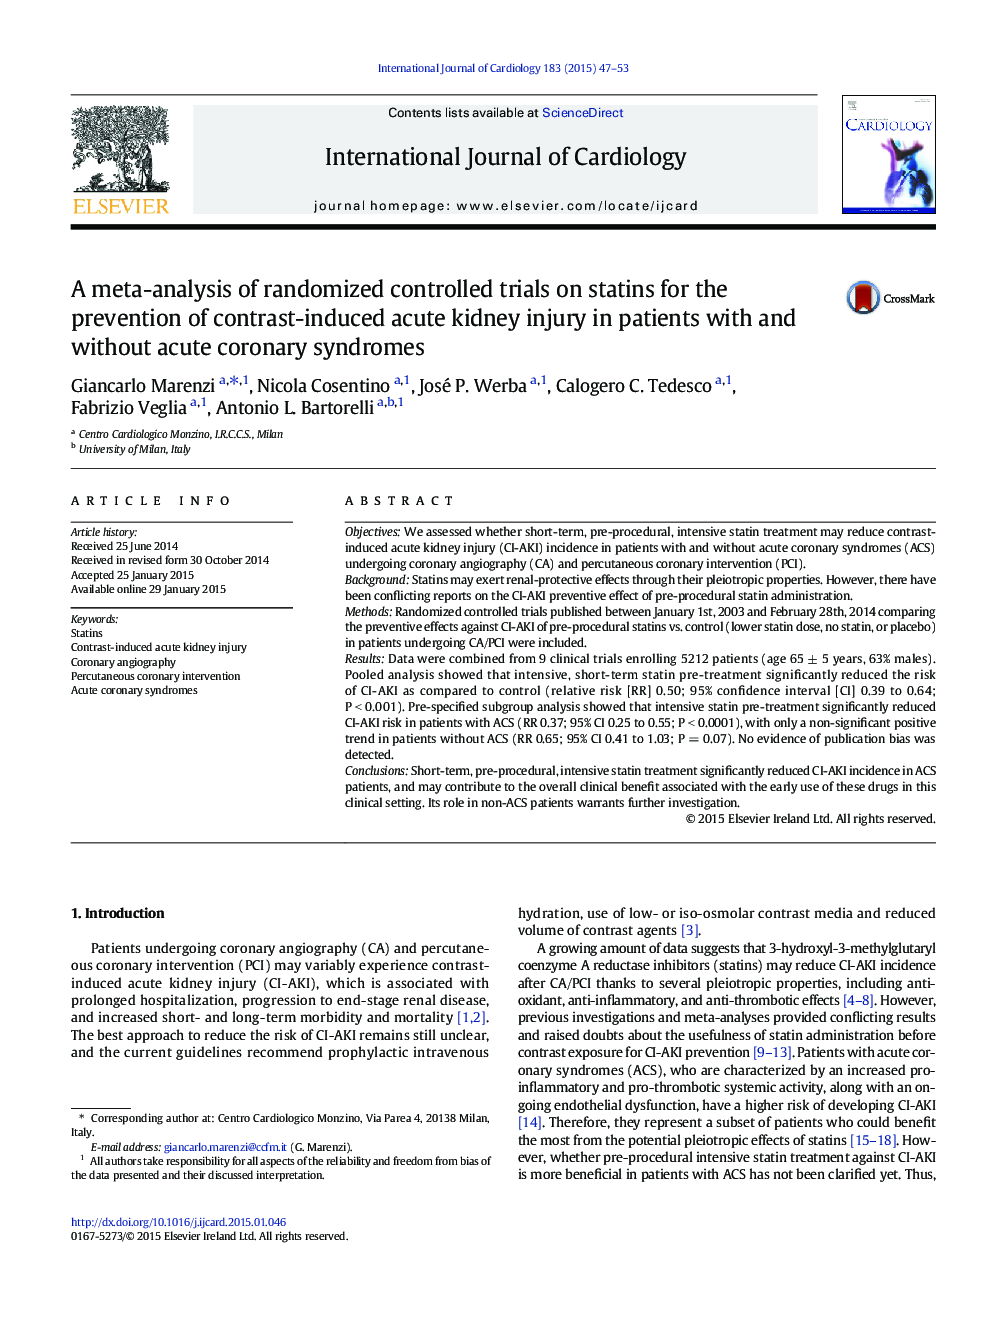 A meta-analysis of randomized controlled trials on statins for the prevention of contrast-induced acute kidney injury in patients with and without acute coronary syndromes